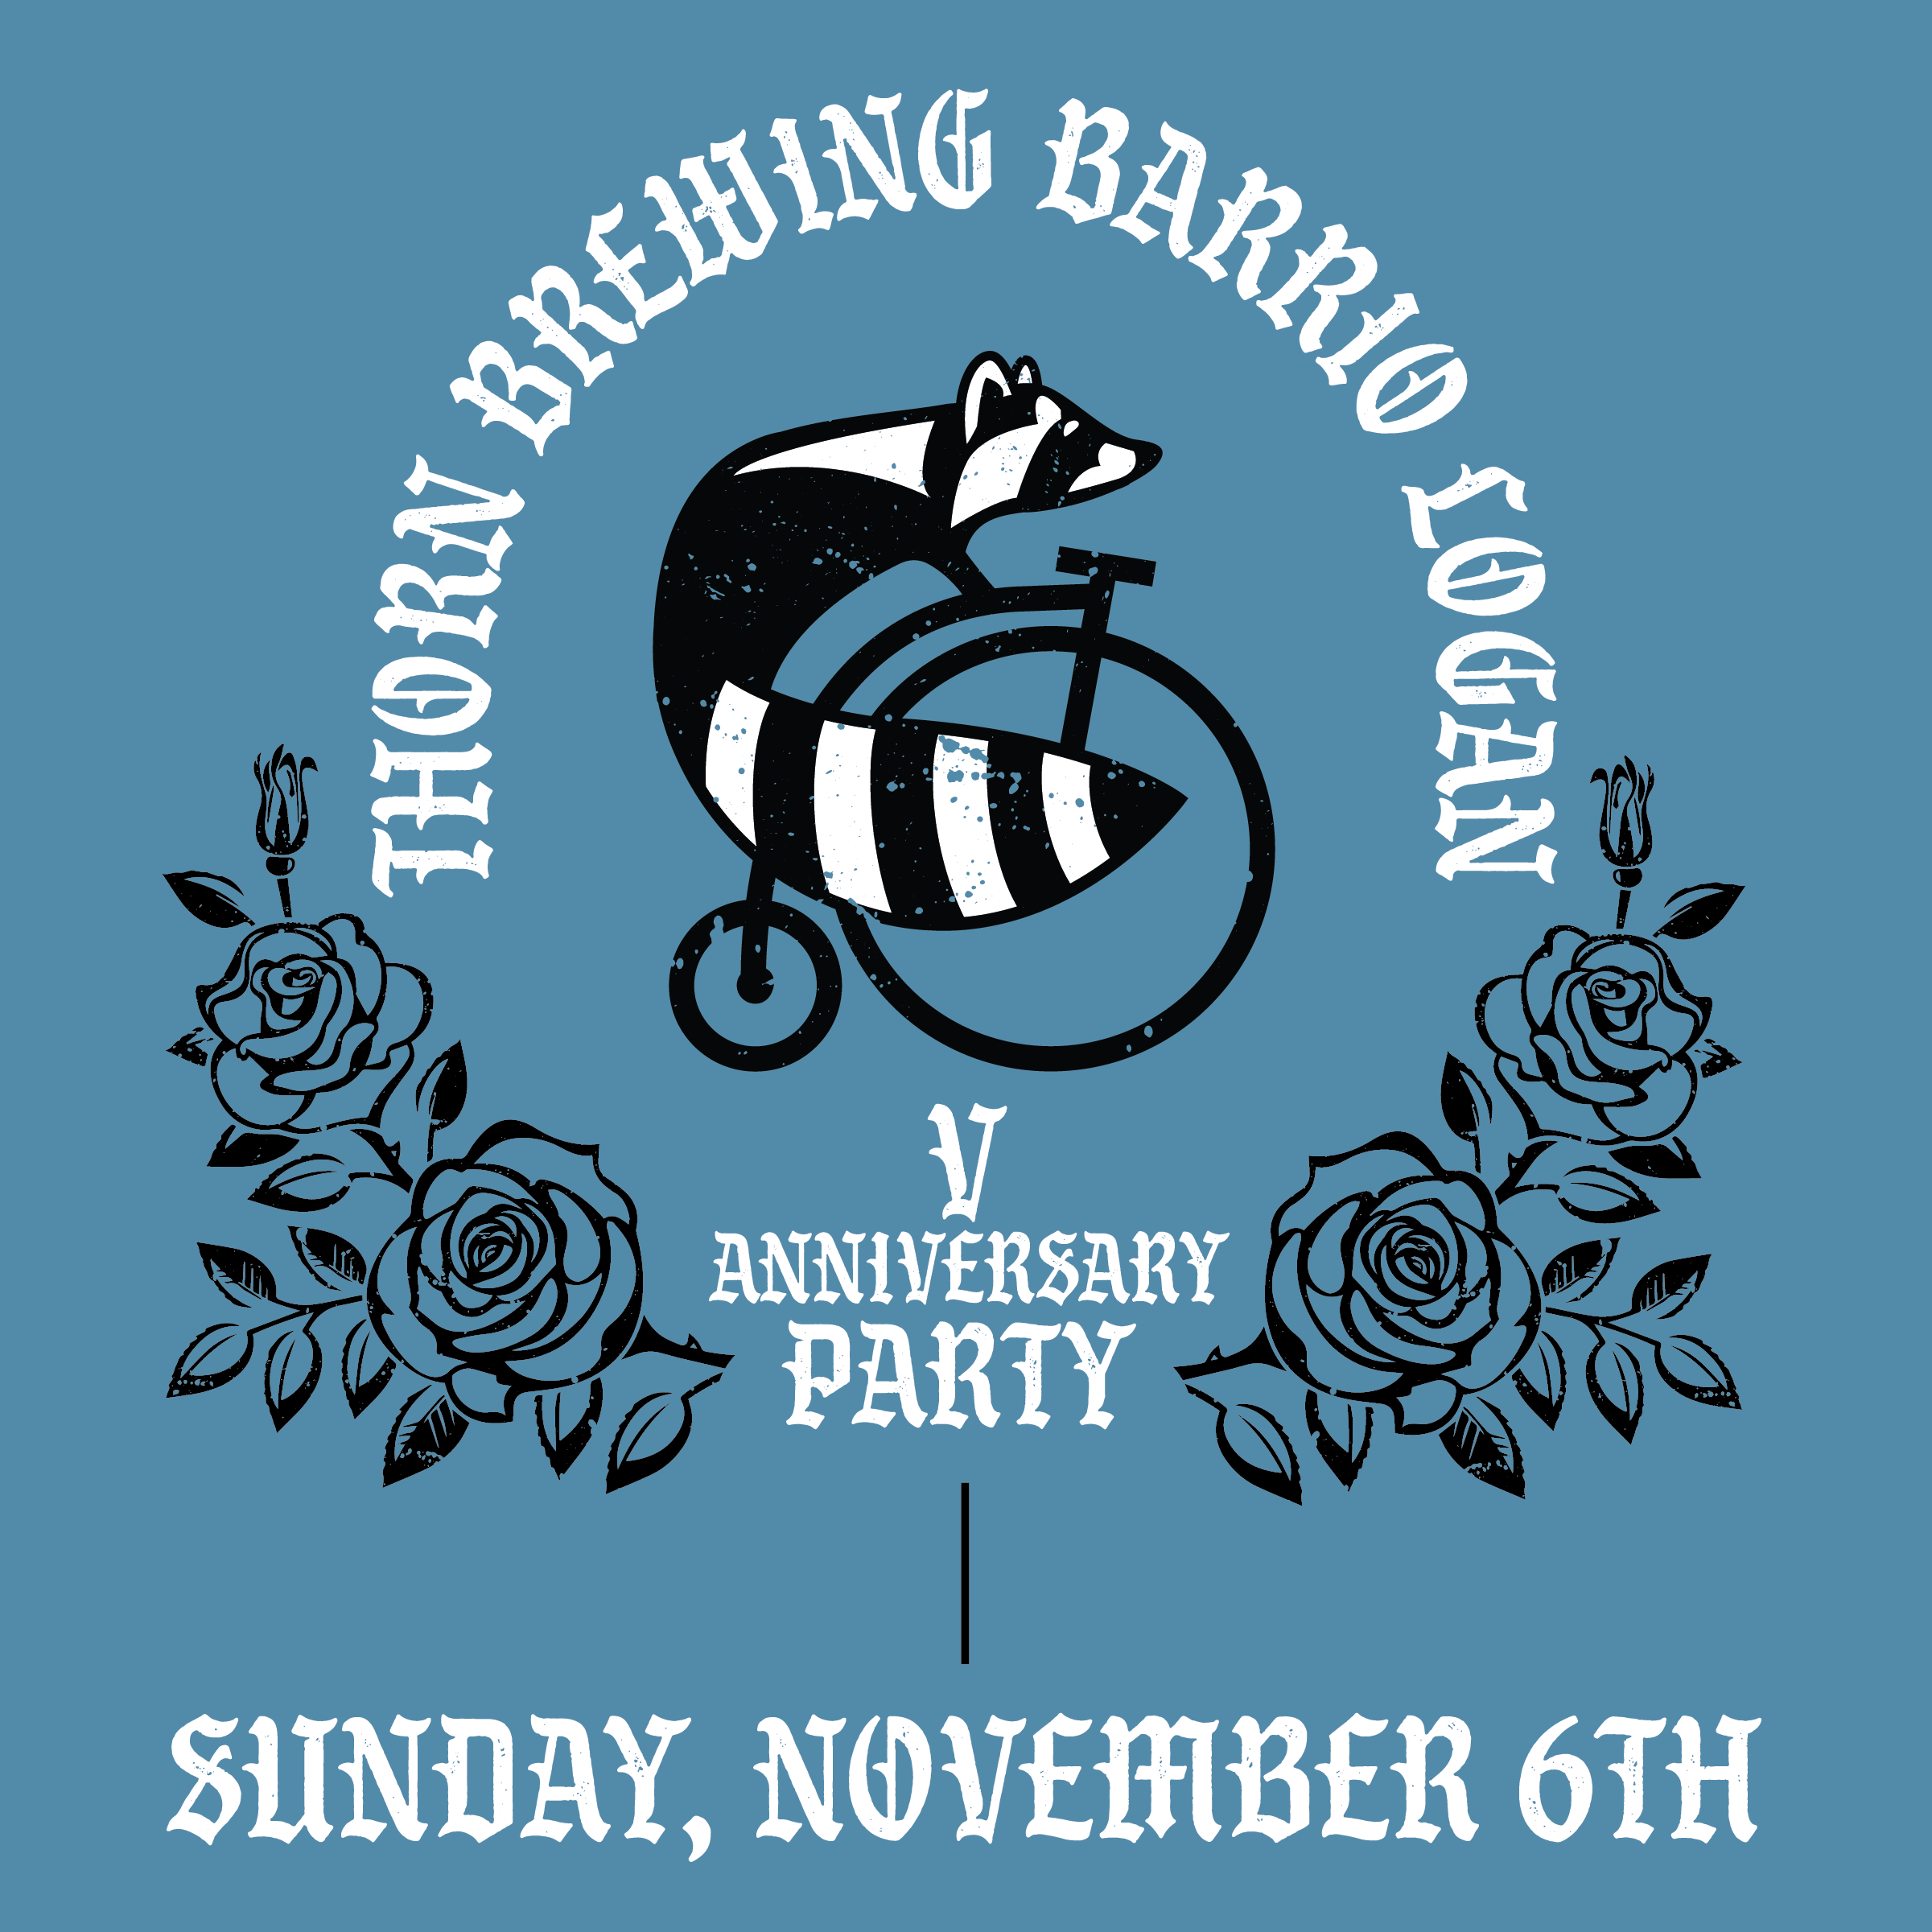 blue graphic with lettering announcing Thorn Barrio Logan's anniversary party on Sunday, Nov 6th from 2-7 pm